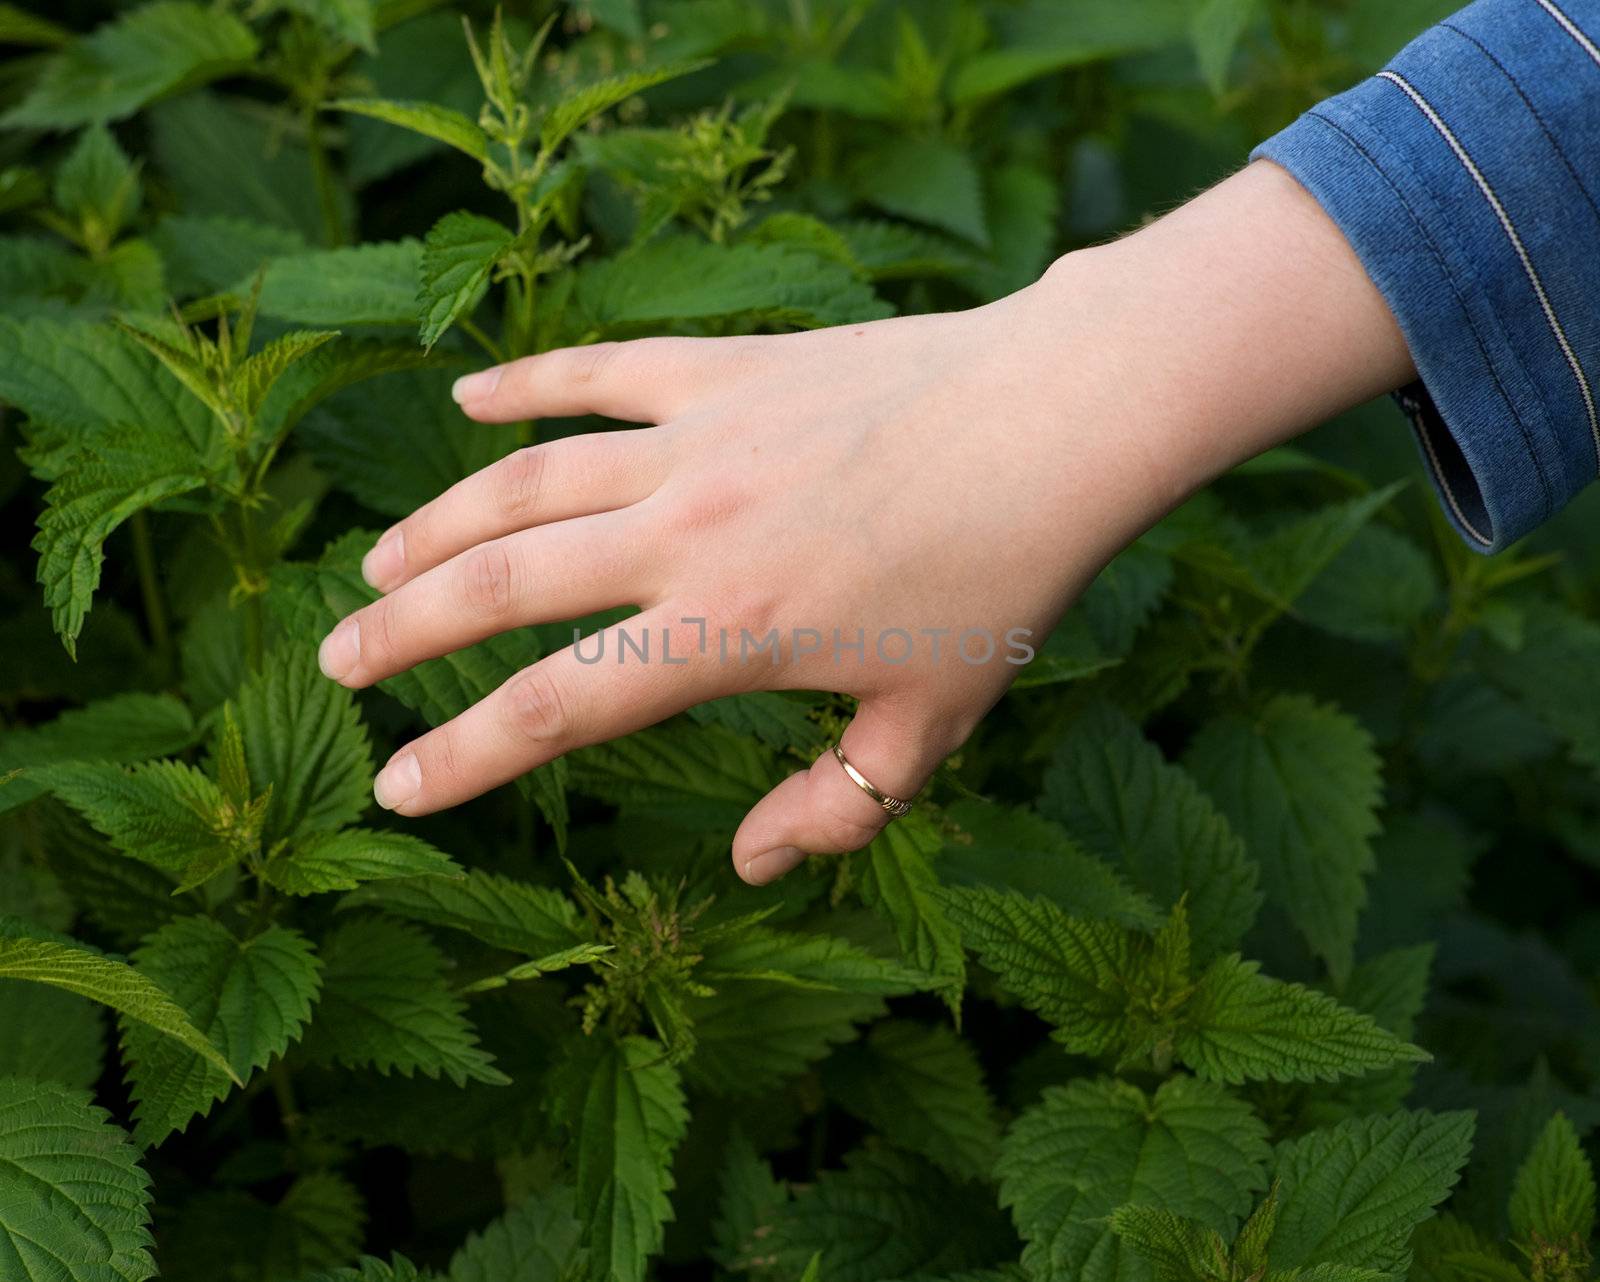 Hand burning about leaves of a nettle